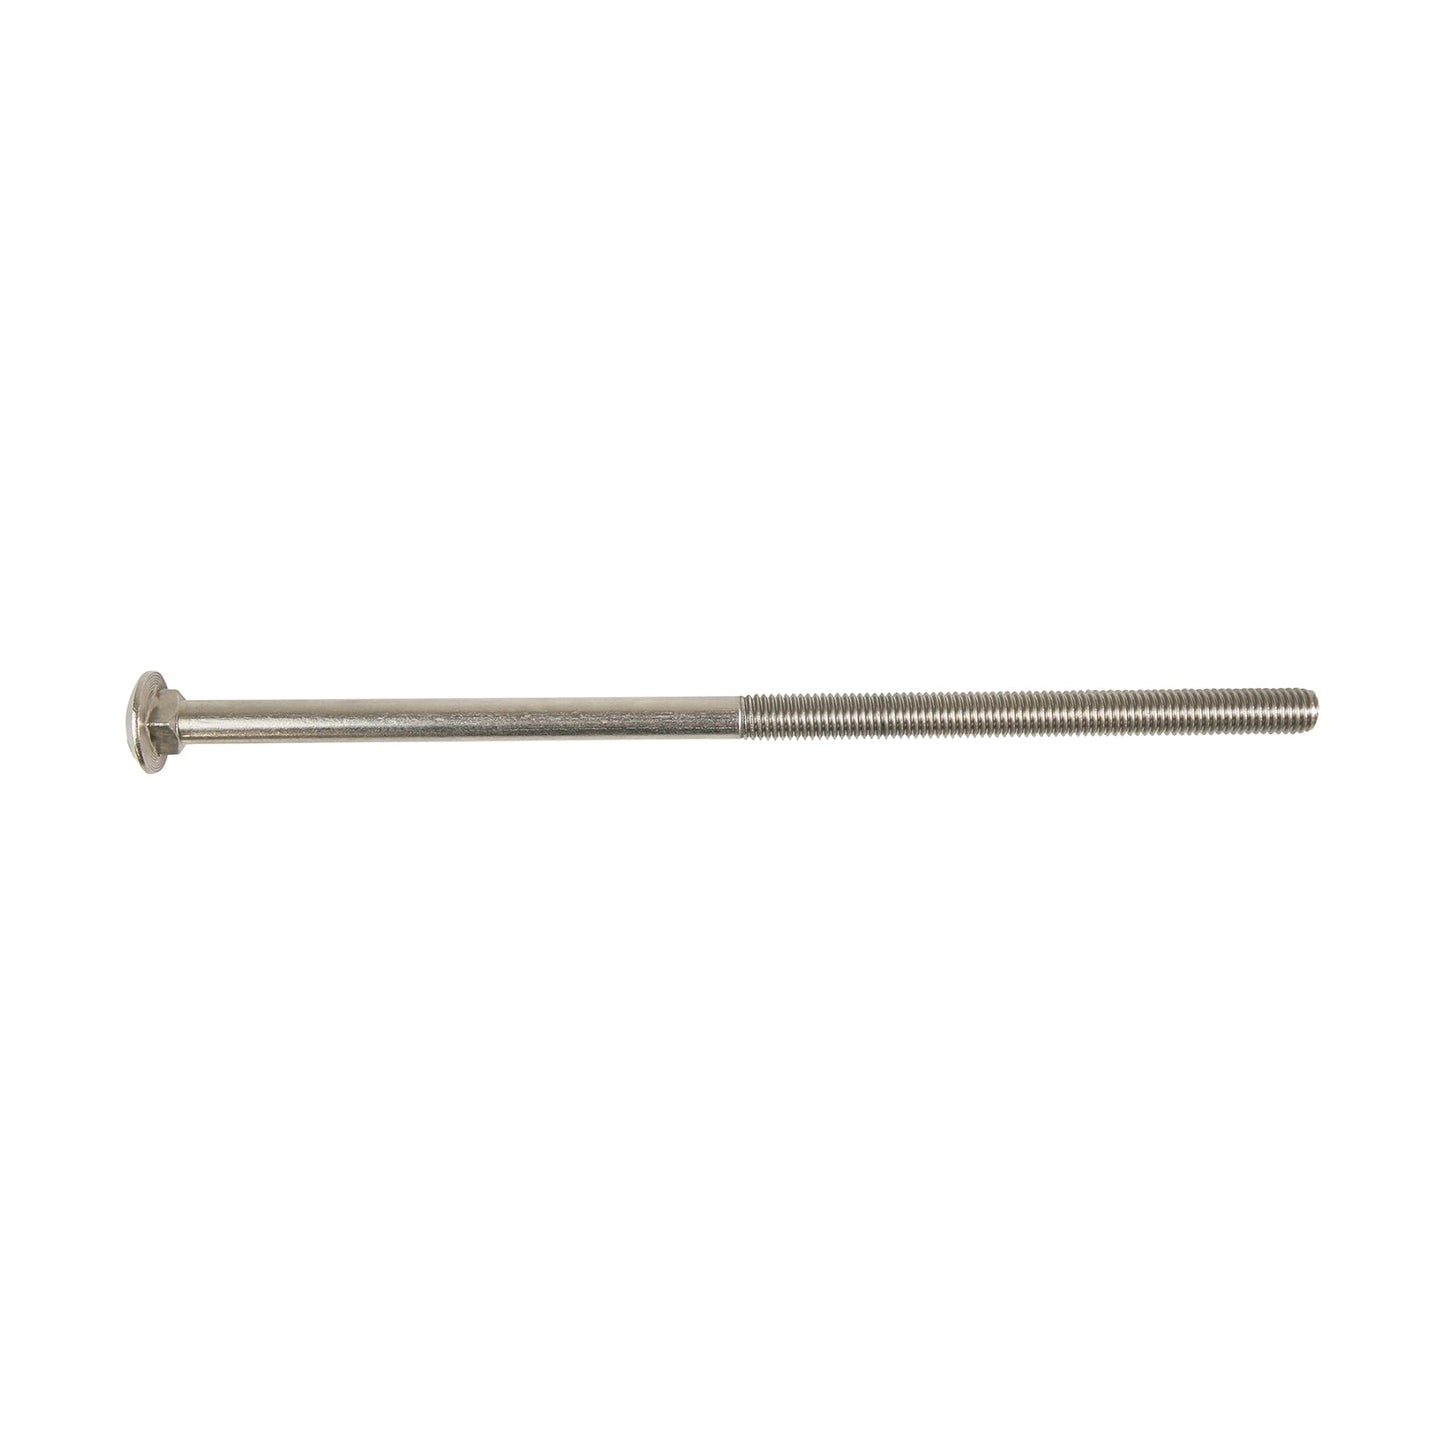 1/2"-13 x 12" Conquest Carriage Bolt - 316 Stainless Steel